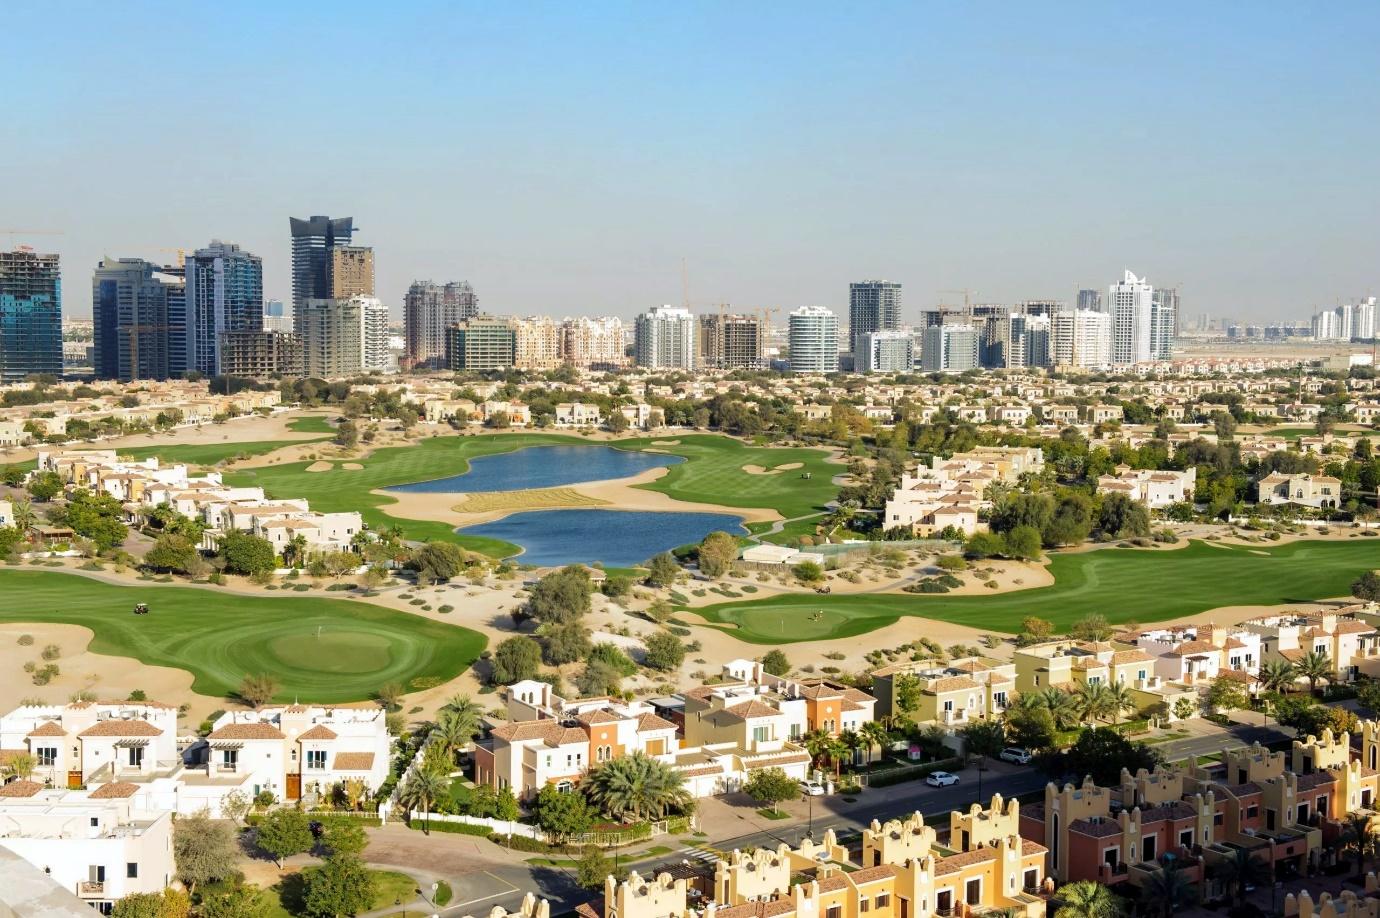 A golf course with a city in the background

Description automatically generated